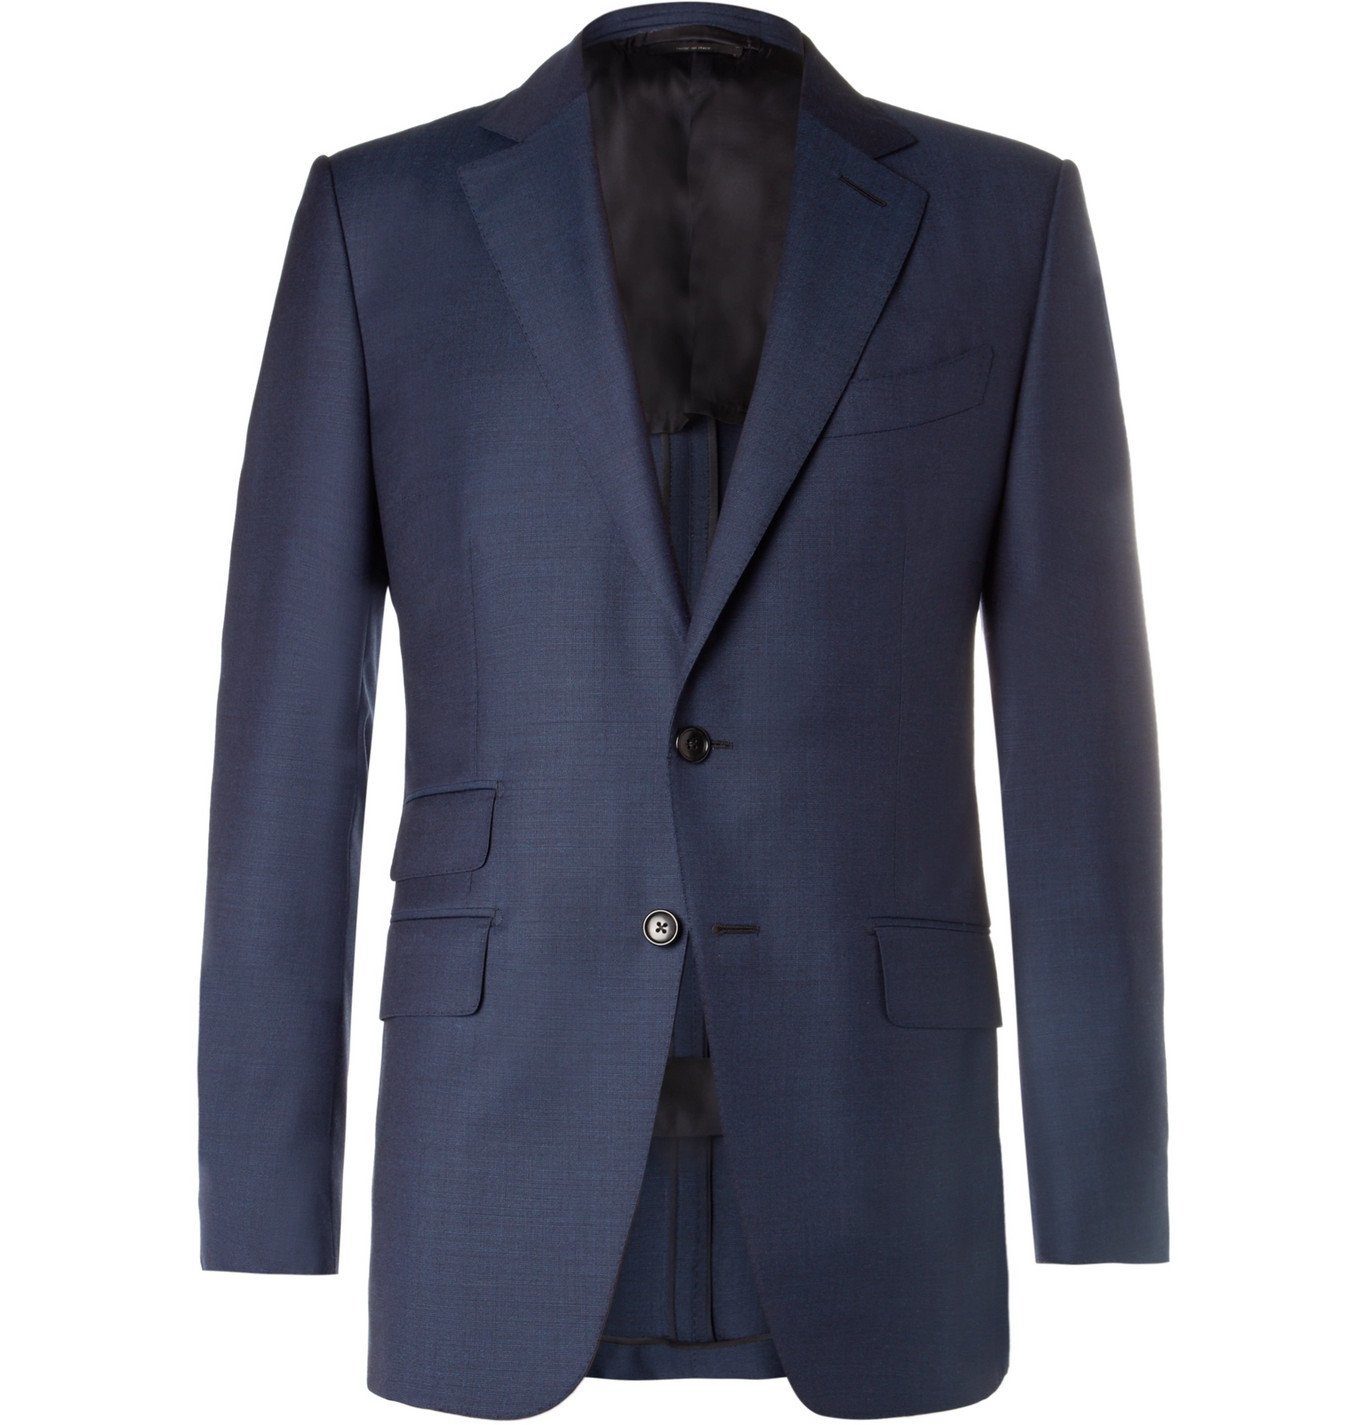 TOM FORD - Navy O'Connor Slim-Fit Wool Suit Jacket - Blue TOM FORD